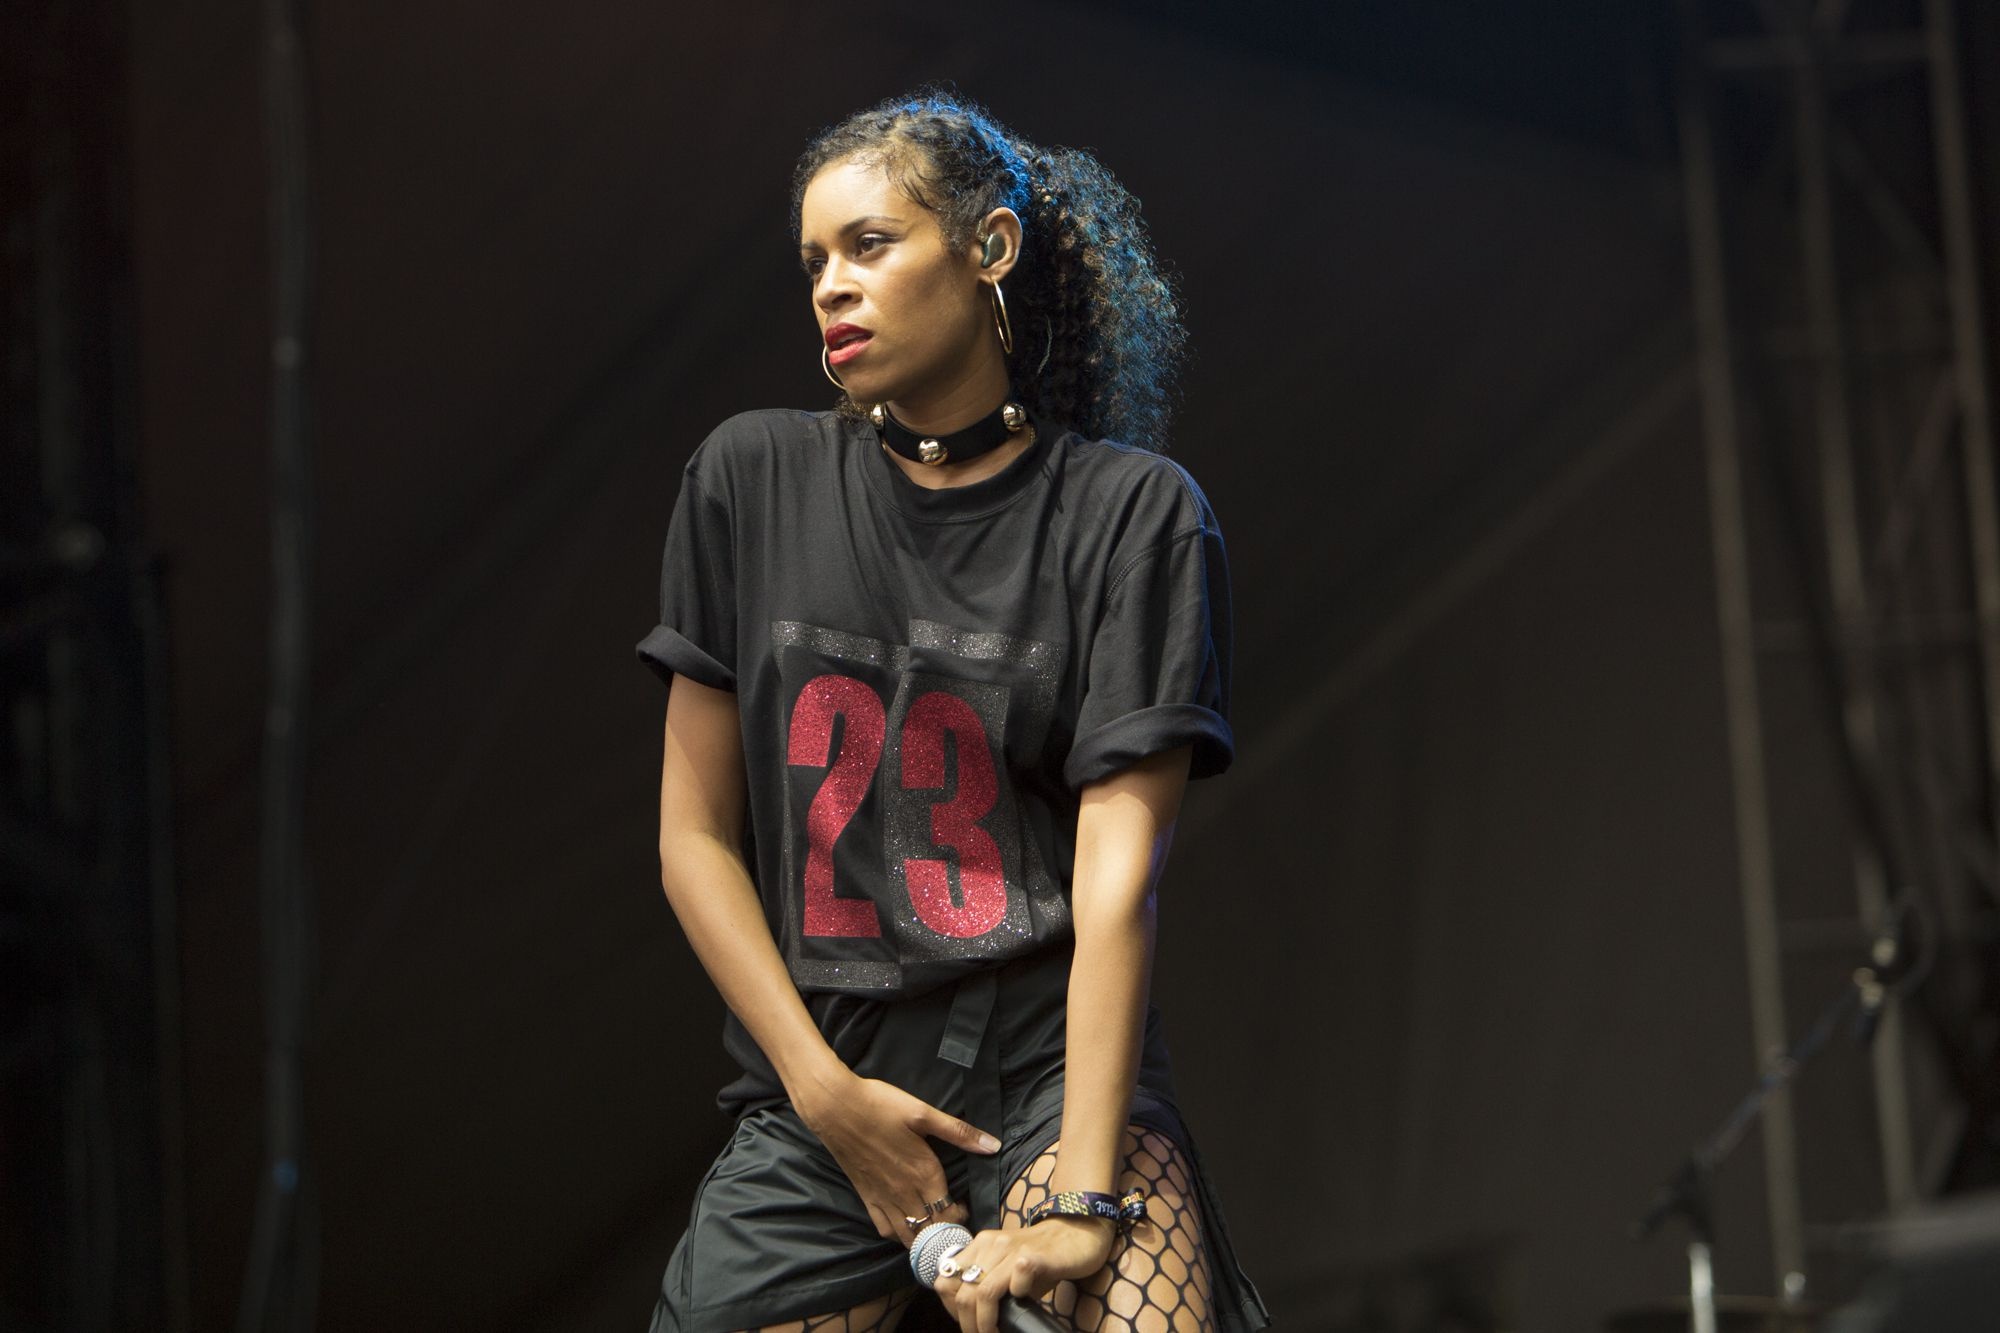 Alunageorge Hd Wallpaper posted by Ryan Anderson 2000x1340